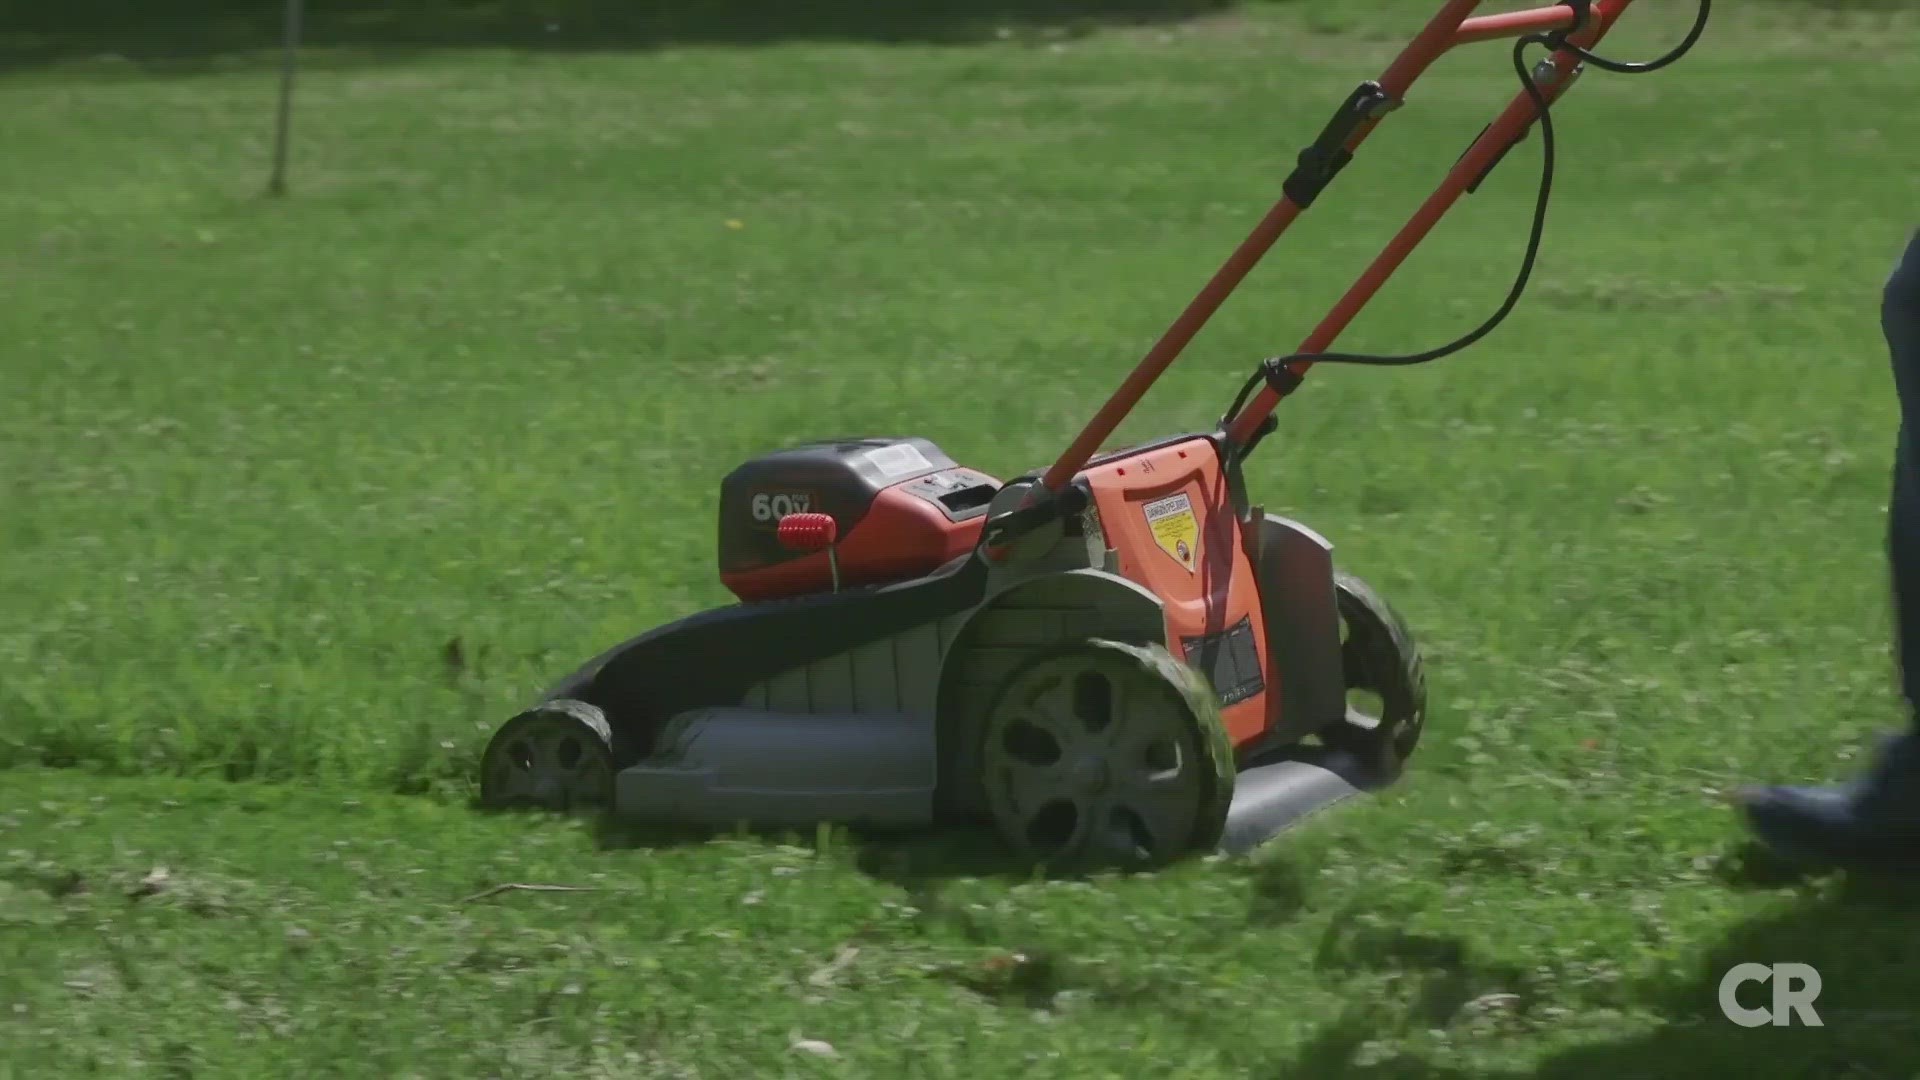 Tanya Rivera breaks down the best land mowers and the best ways to use them as summer approaches.